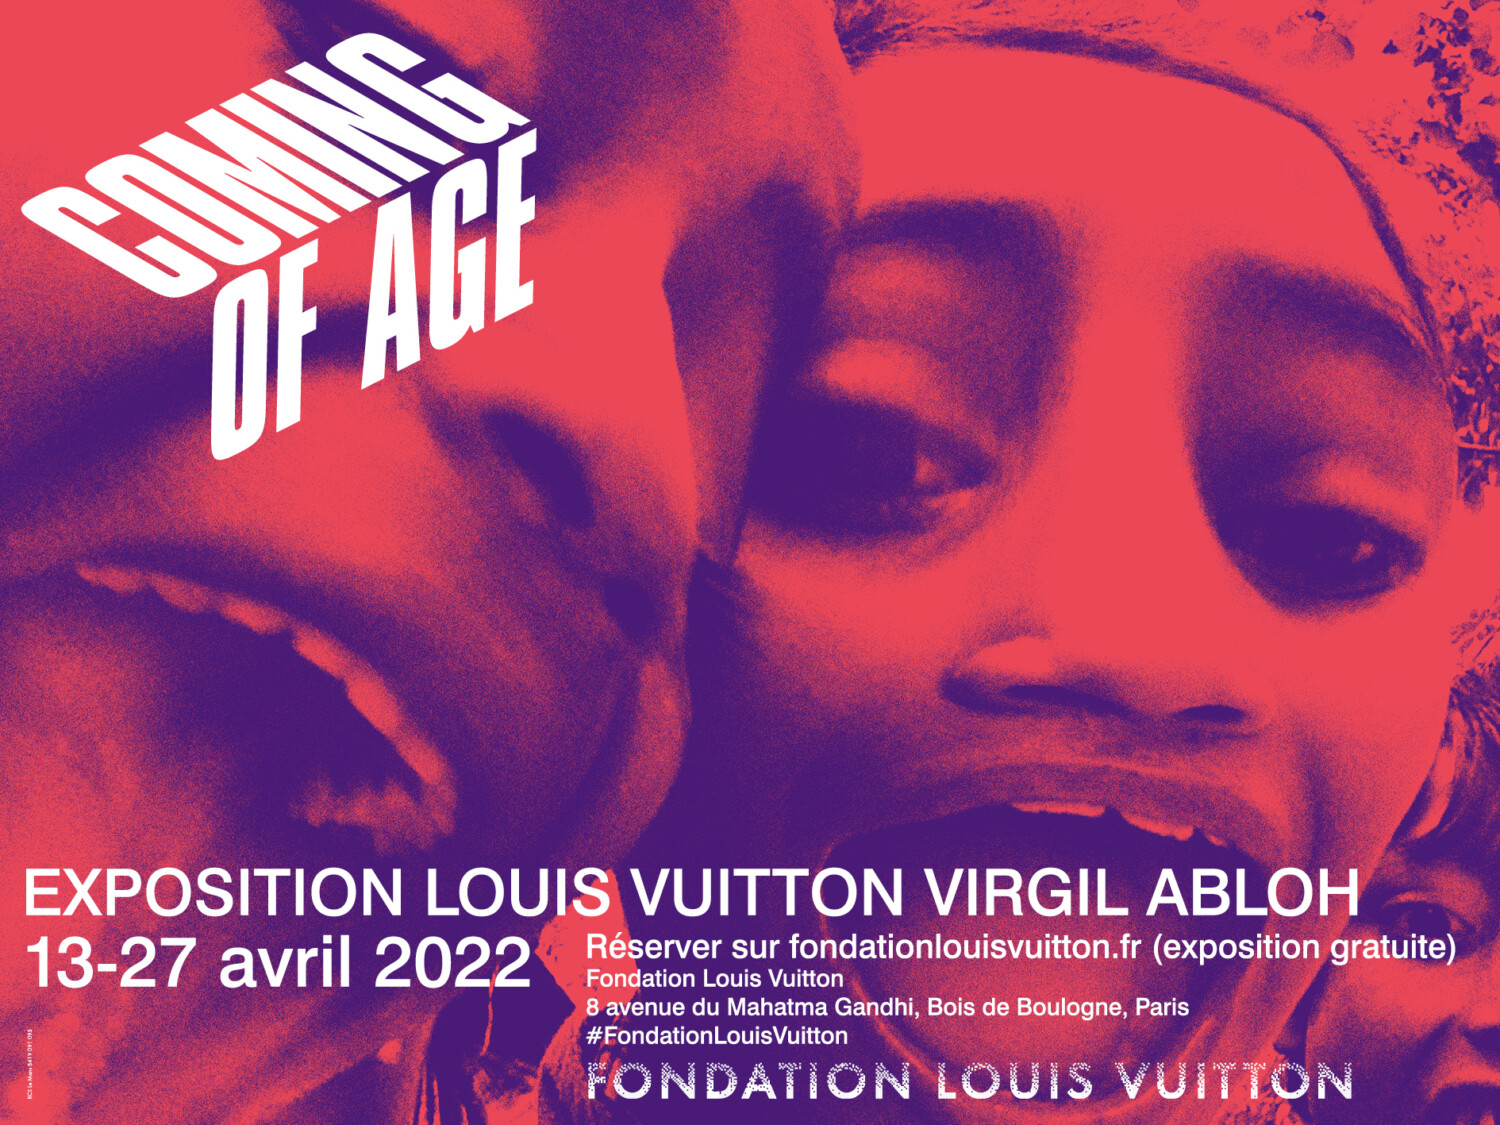 Virgil Abloh's “Coming of Age” Exhibition, presented by the Louis